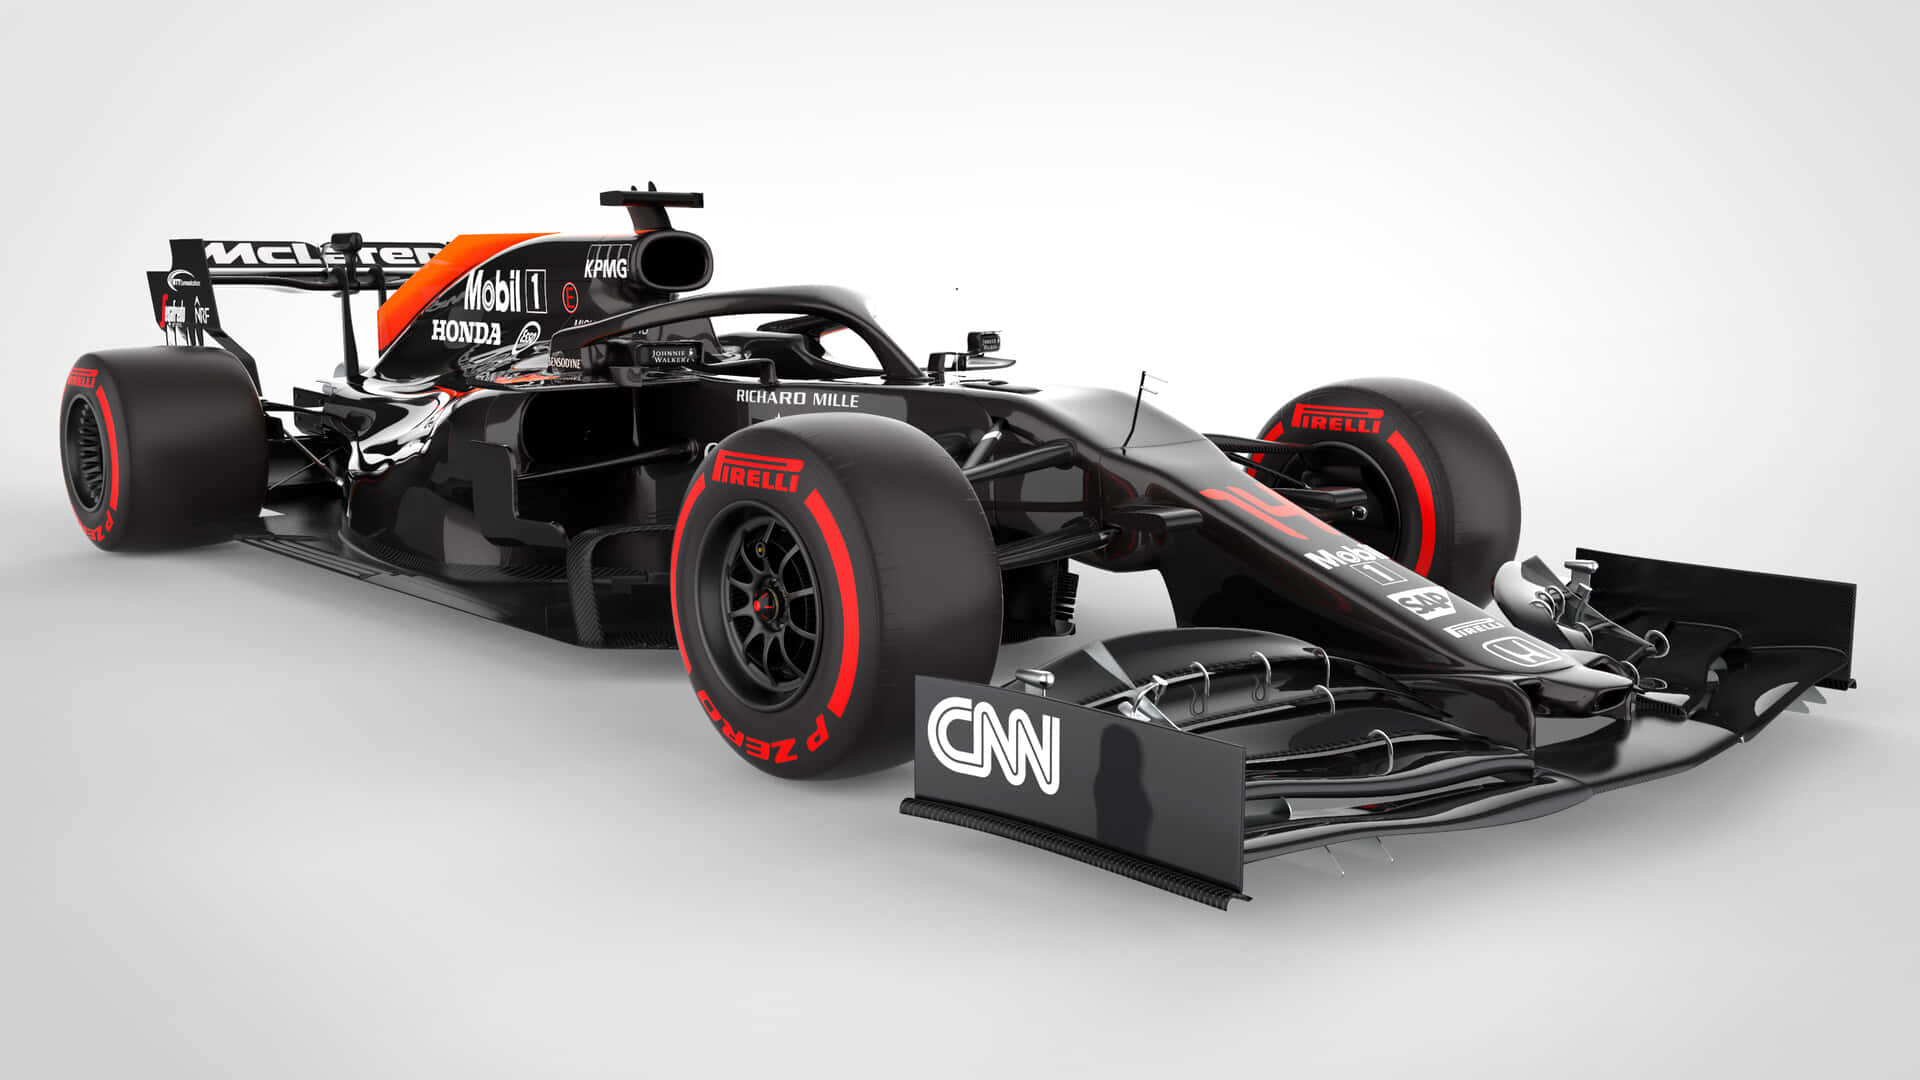 A Black And Orange Racing Car On A White Background